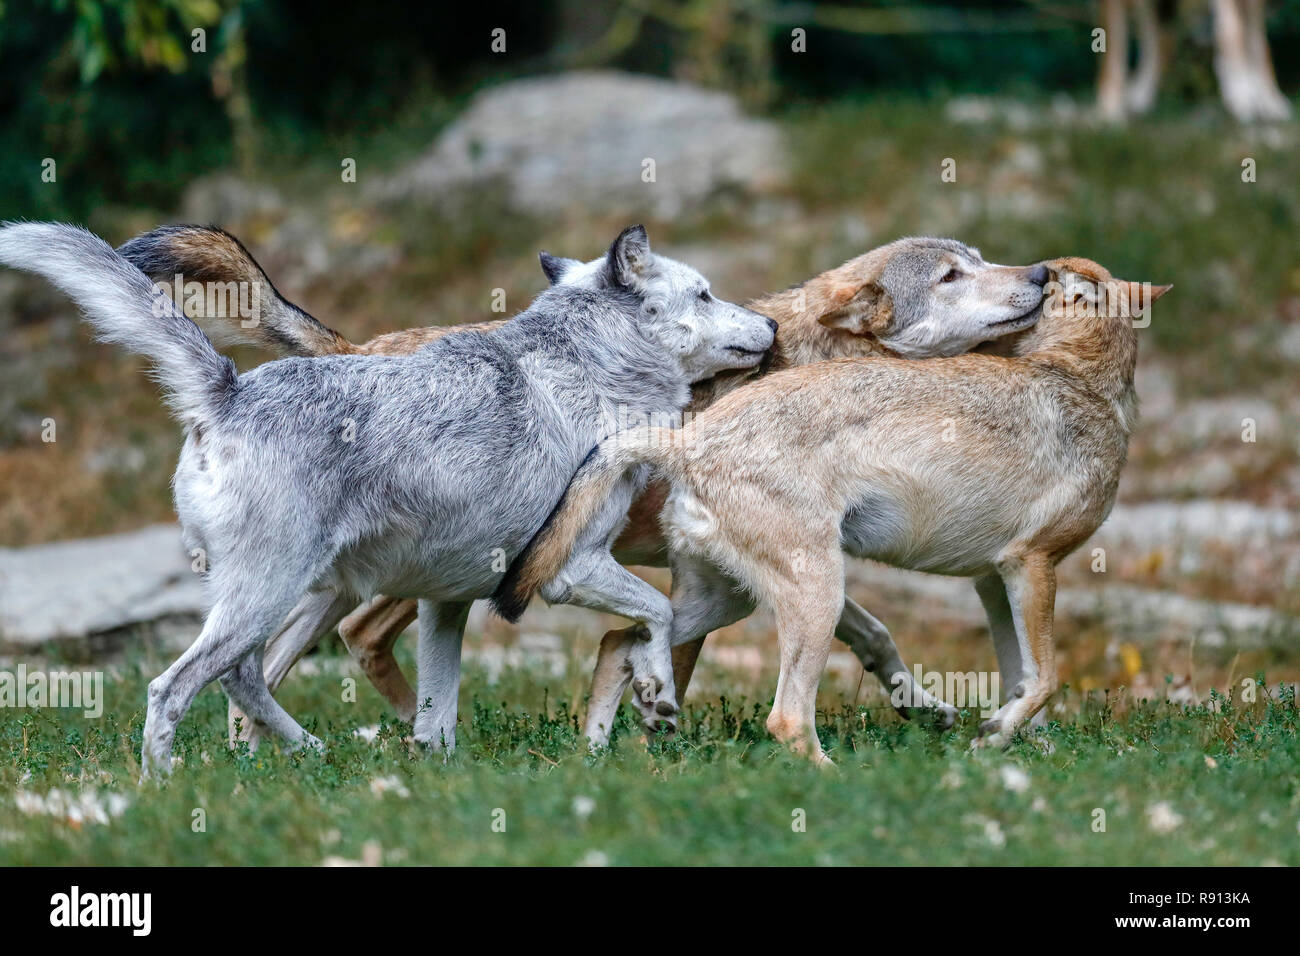 Timber Wolf (Canis lupus lycaon), Welpe, Captive Stockfoto